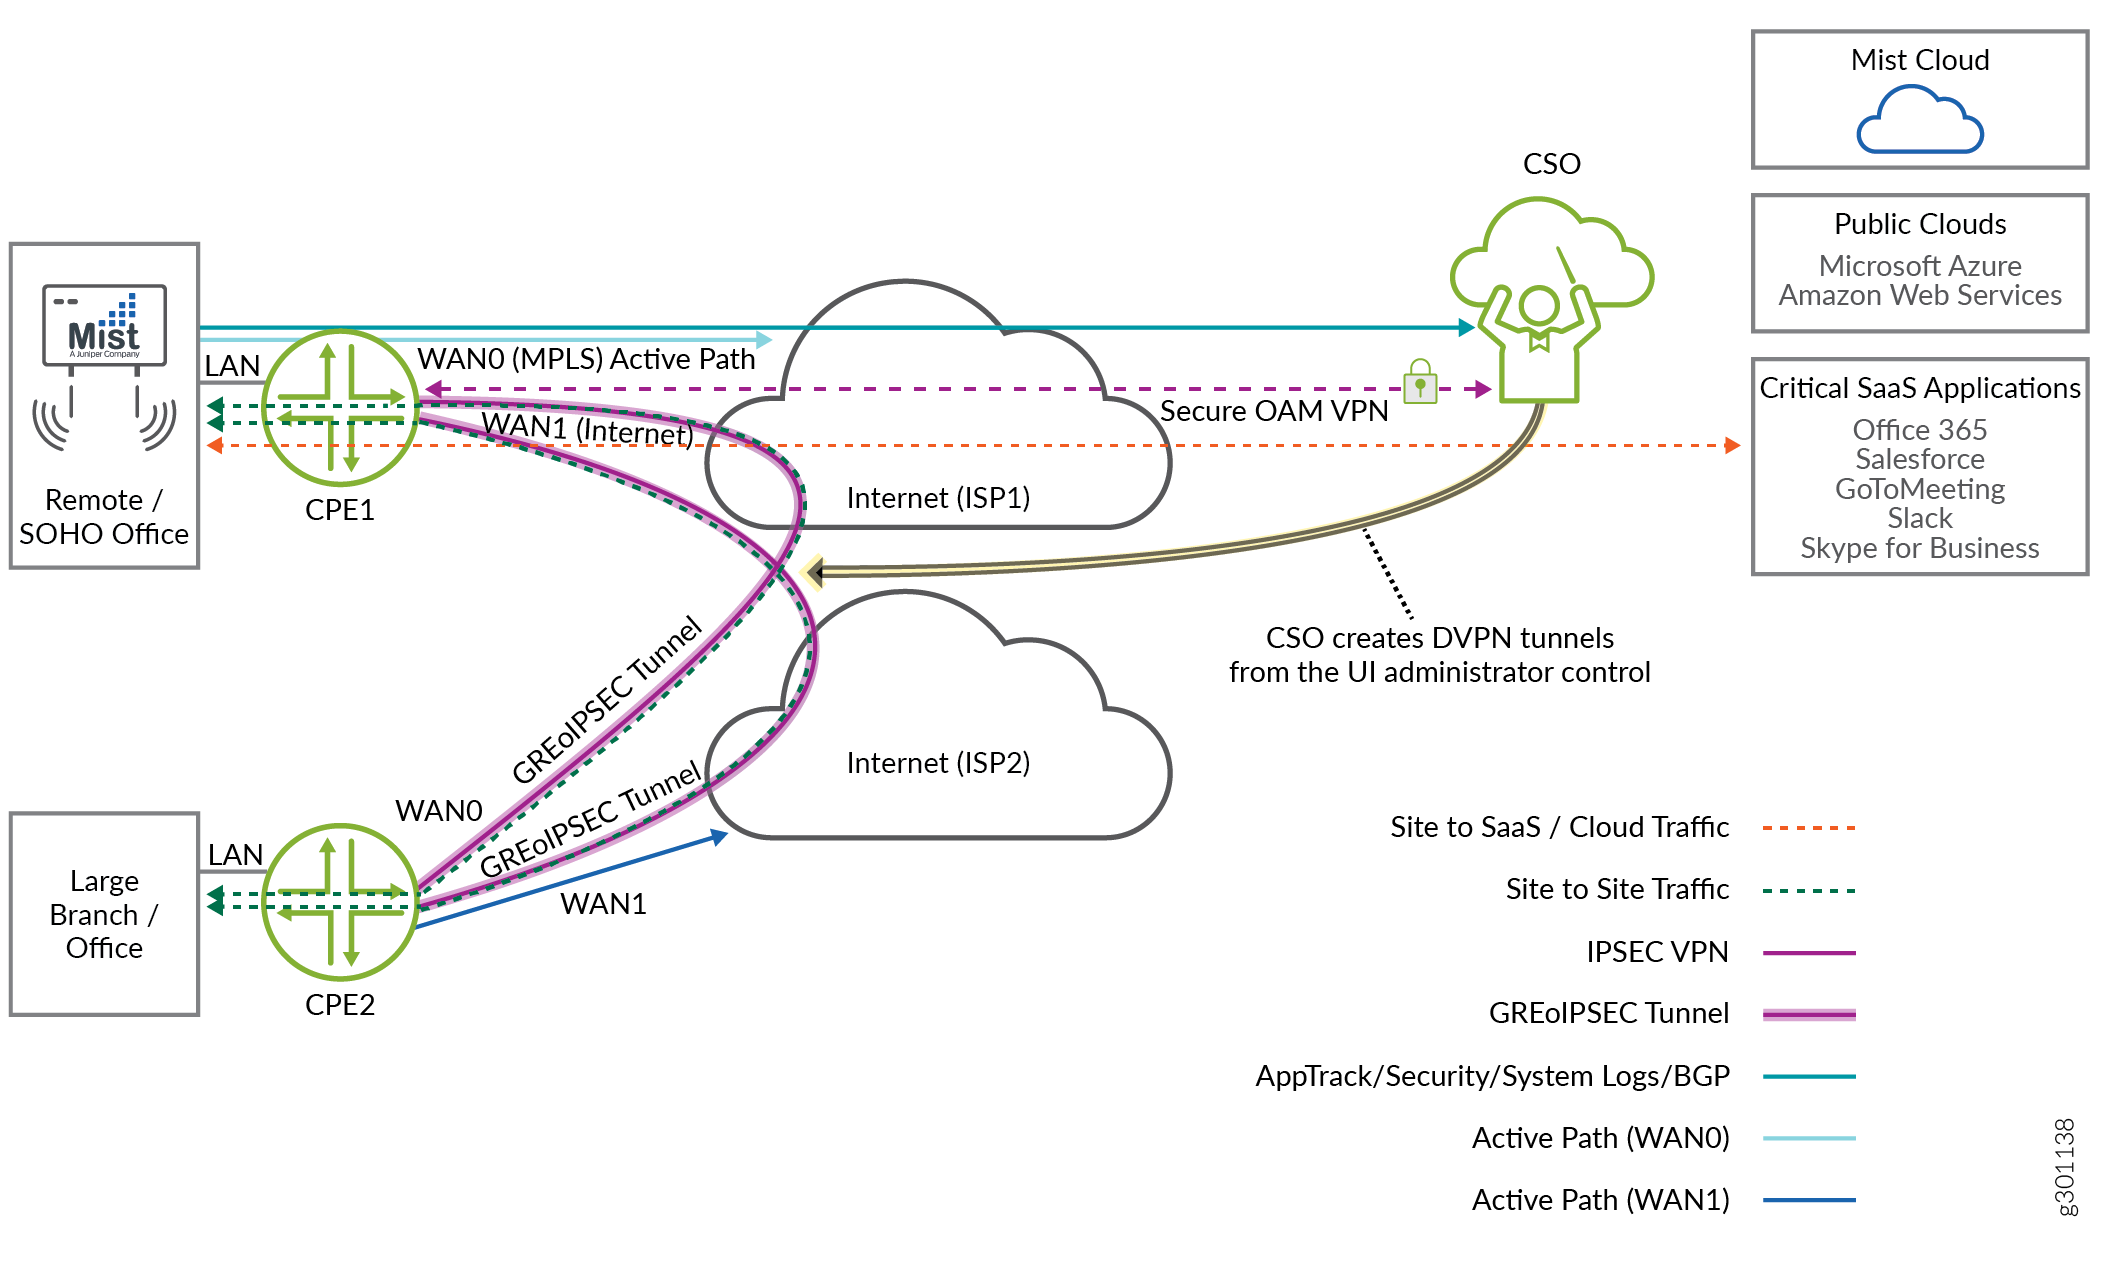 Two CPEs Connected Through DVPN Tunnels Without
Hub